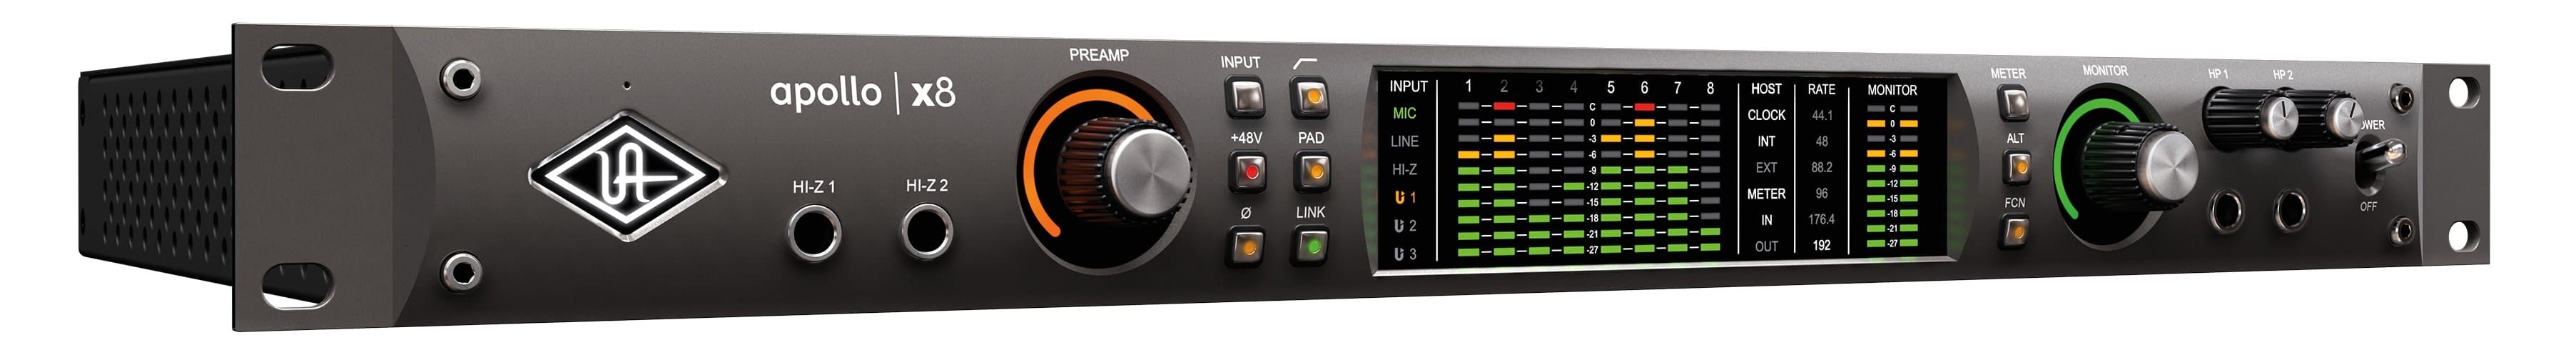 image of the Apollo x8 interface by Universal Audio